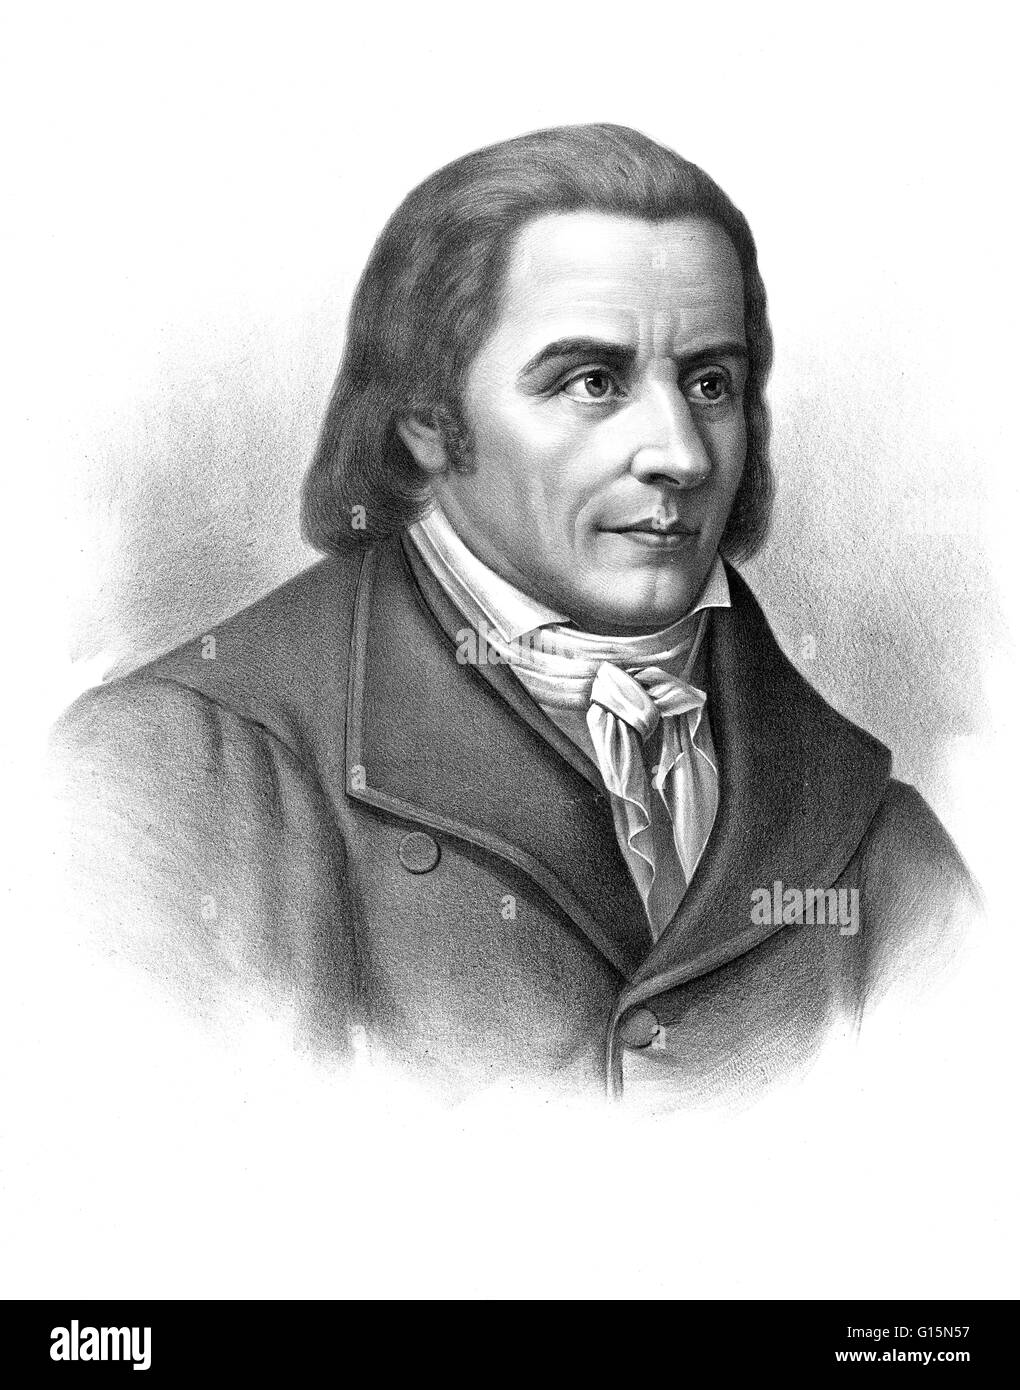 Johann Heinrich Pestalozzi (January 12, 1746 - February 17, 1827) was a Swiss pedagogue and educational reformer. He was a Romantic who felt that education must be broken down to its elements in order to have a complete understanding of it. He emphasized Stock Photo